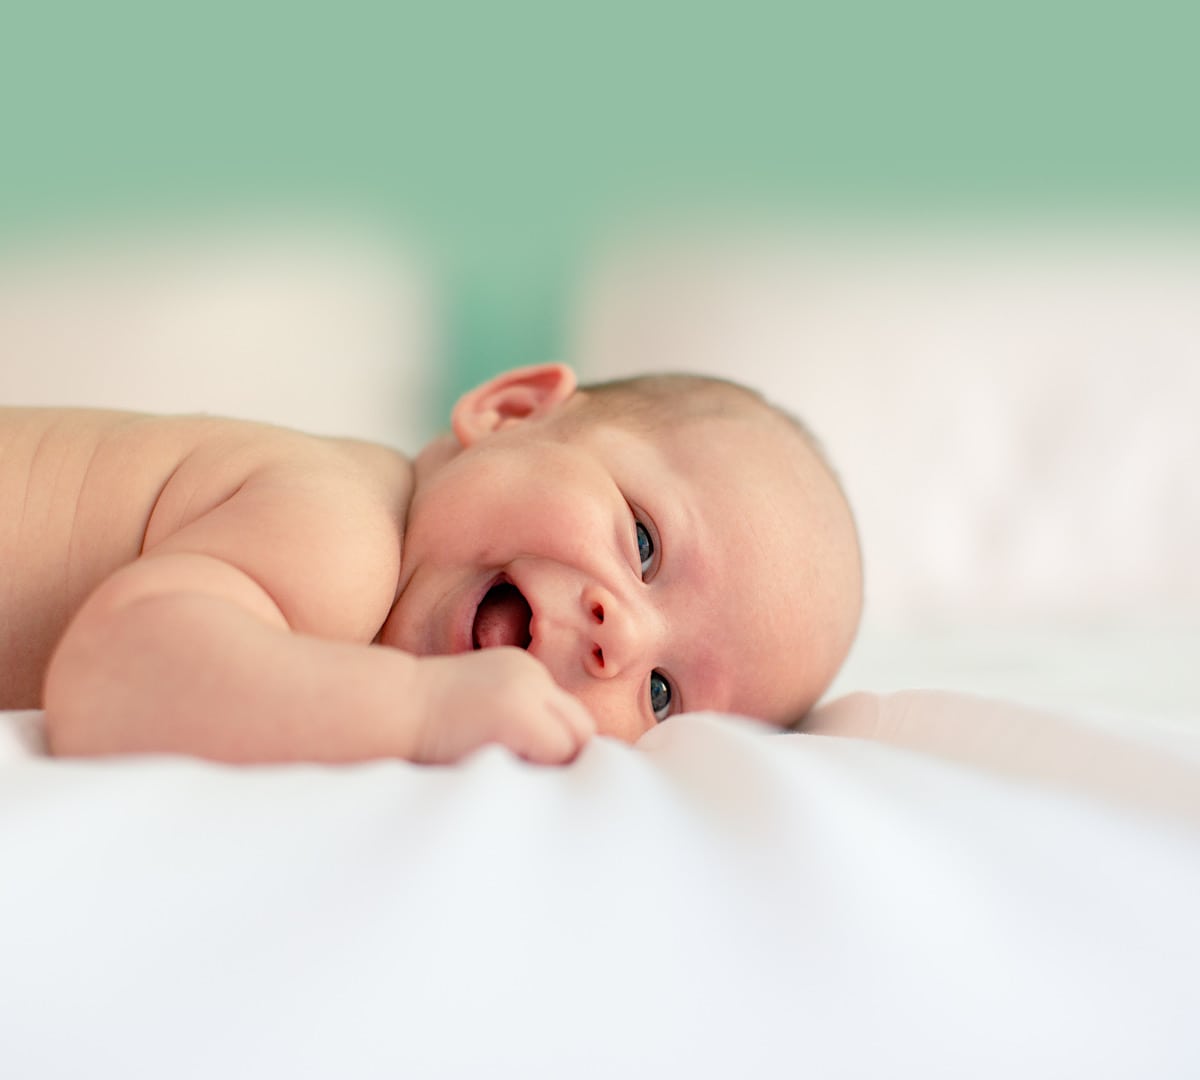 Creating A Schedule For Babies With 4 Simple Tips